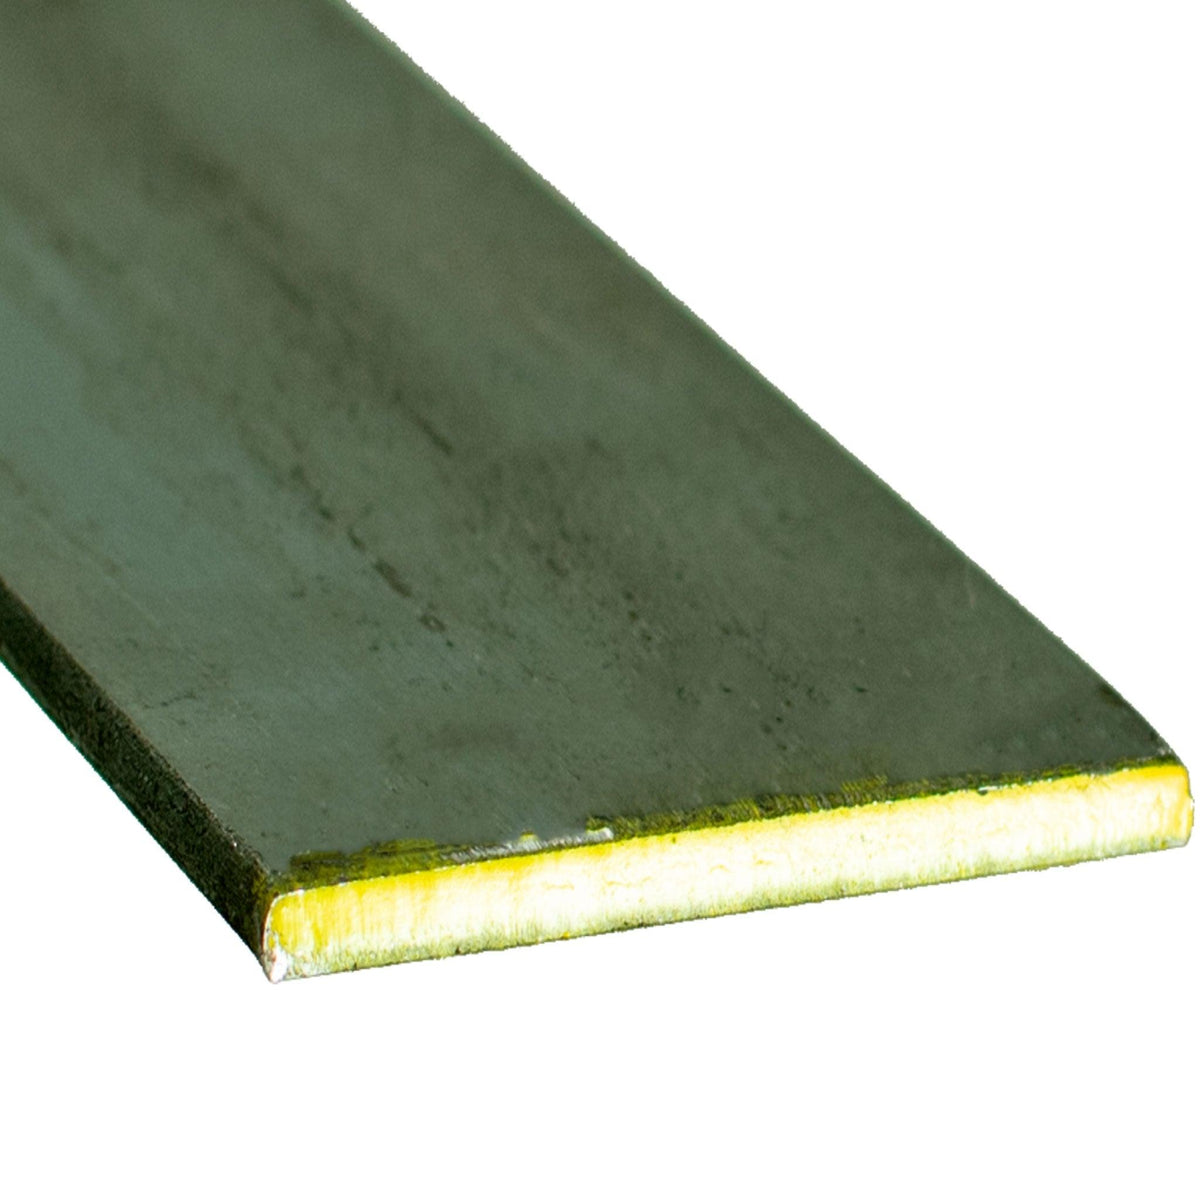 Hot Rolled Flat Bar Steel Raw Materials Sold at Lee Display - 1-1/2in X 3FT